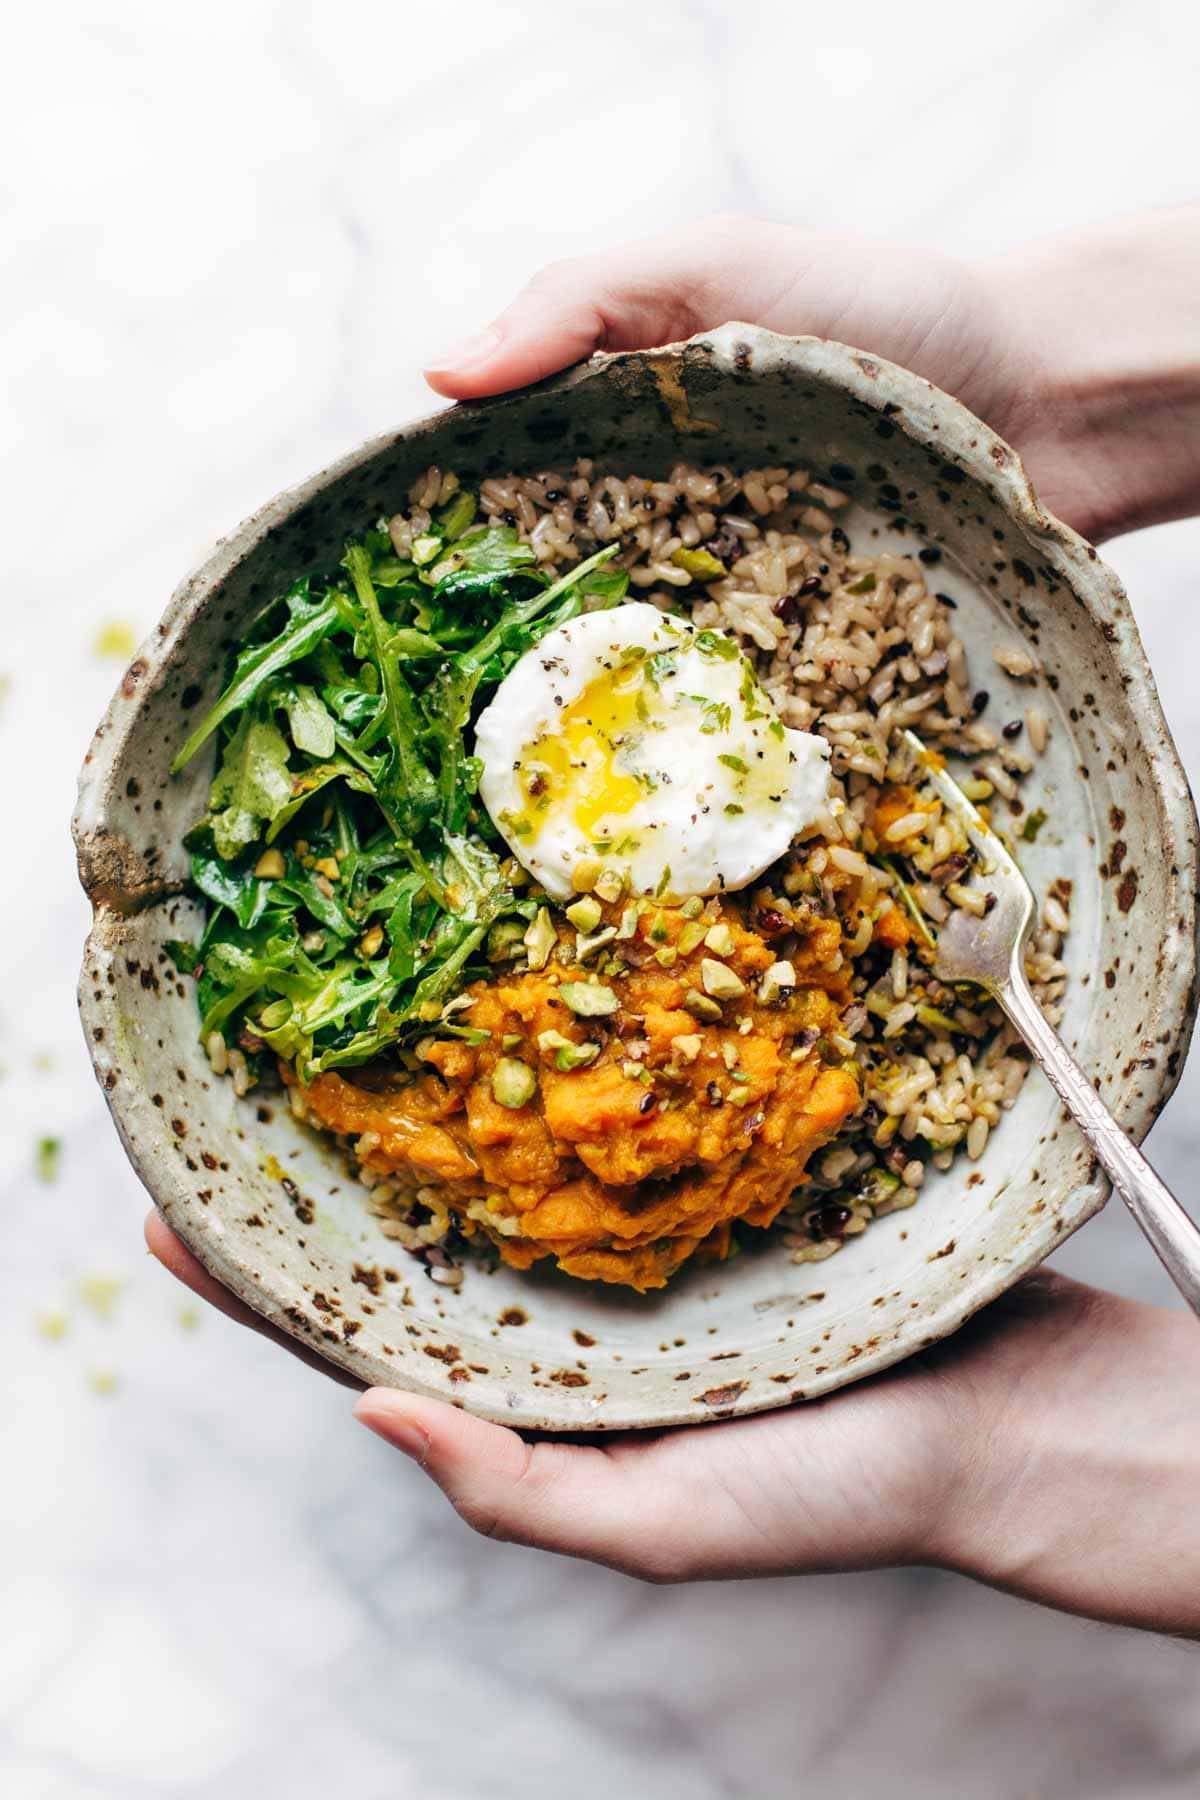 Healing Bowls with Turmeric Sweet Potatoes, Poached Eggs, and Lemon Dressing